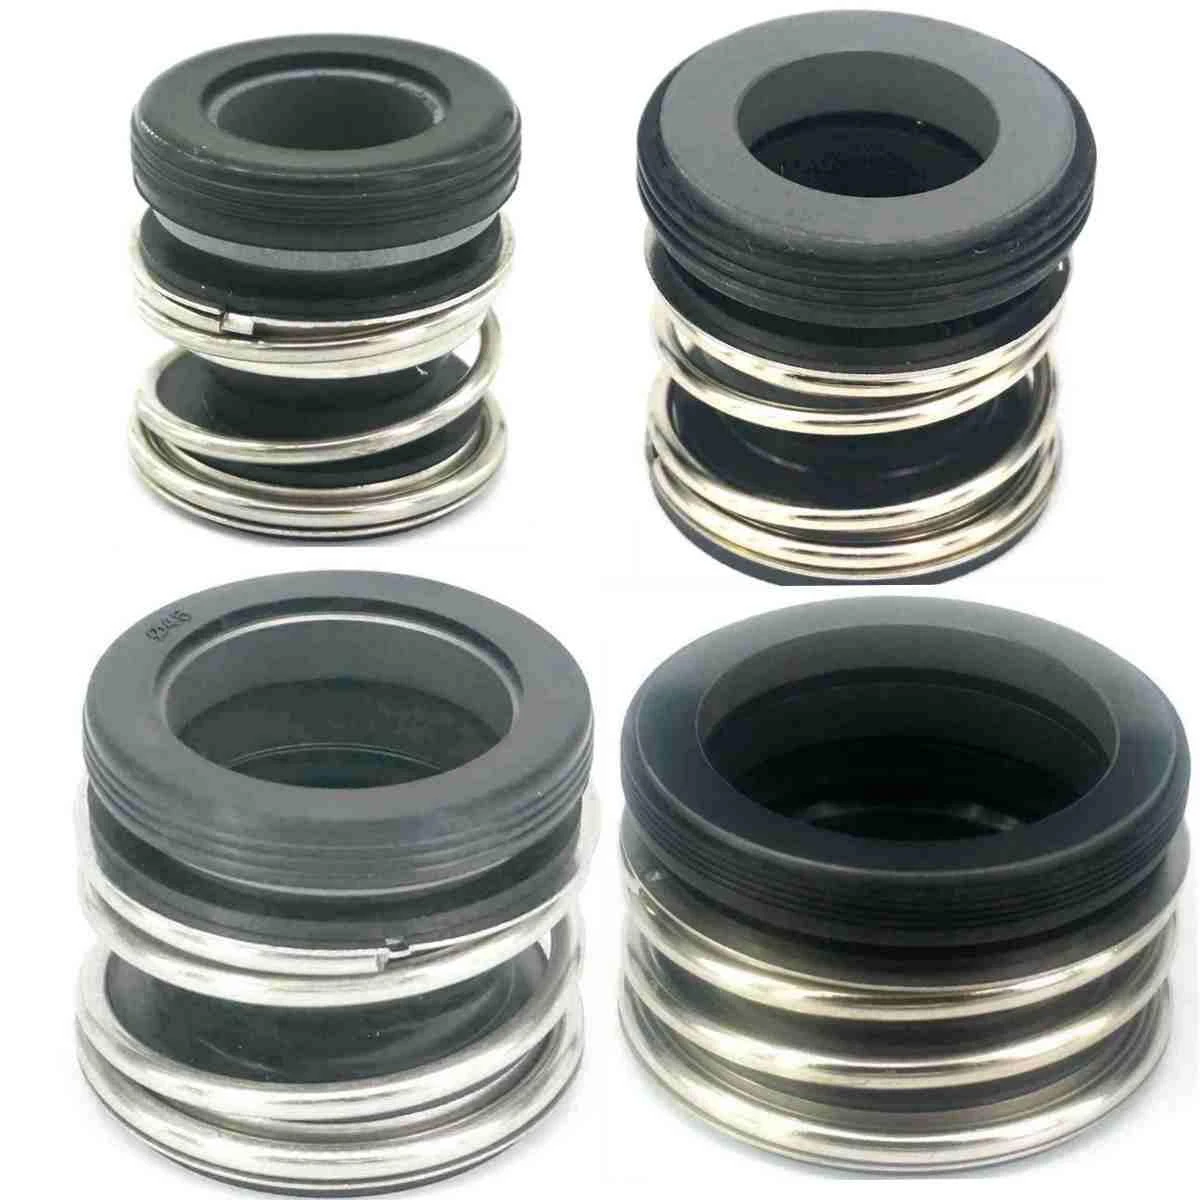 10/12/14/15/16/17/18/20/22/24/25/28/30mm ID Mechanical Water Pump Shaft Seal Single Coil Spring Carbon/SiC Ring Model MG1/109